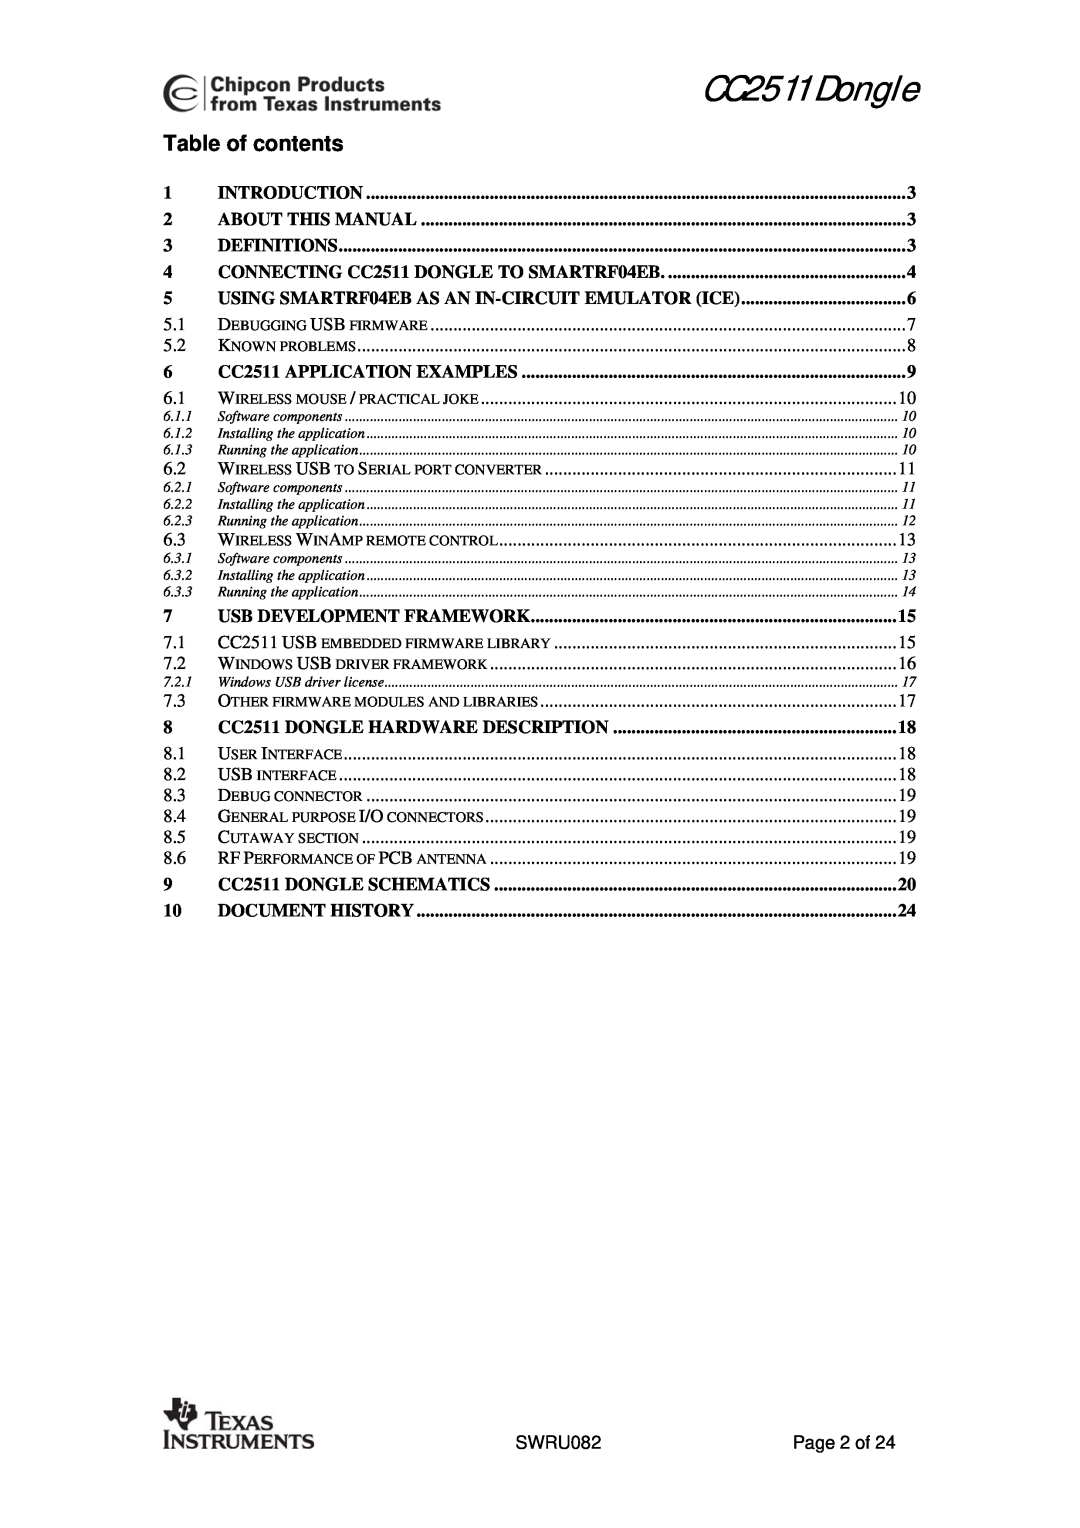 Texas Instruments user manual Table of contents, CC2511 Dongle 